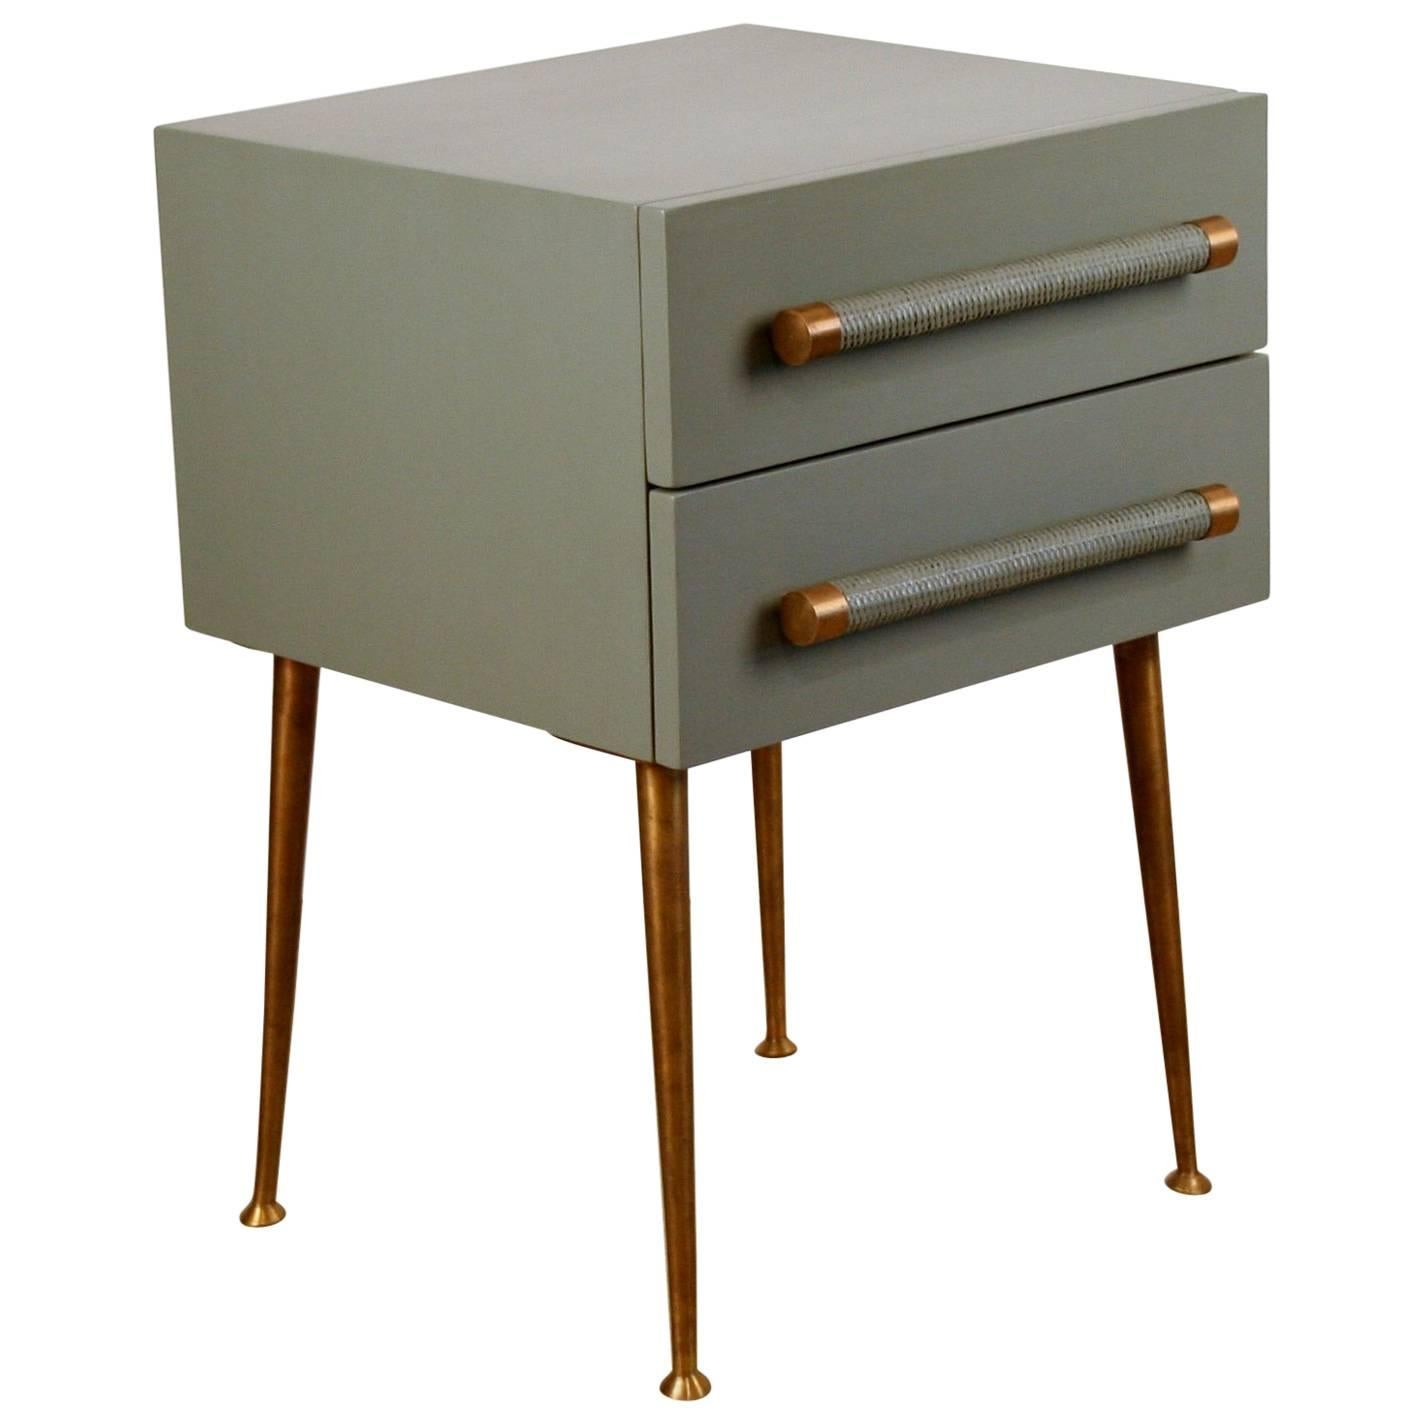 Two-Drawer Bedside Table with Brass Legs and Wicker and Brass Handles